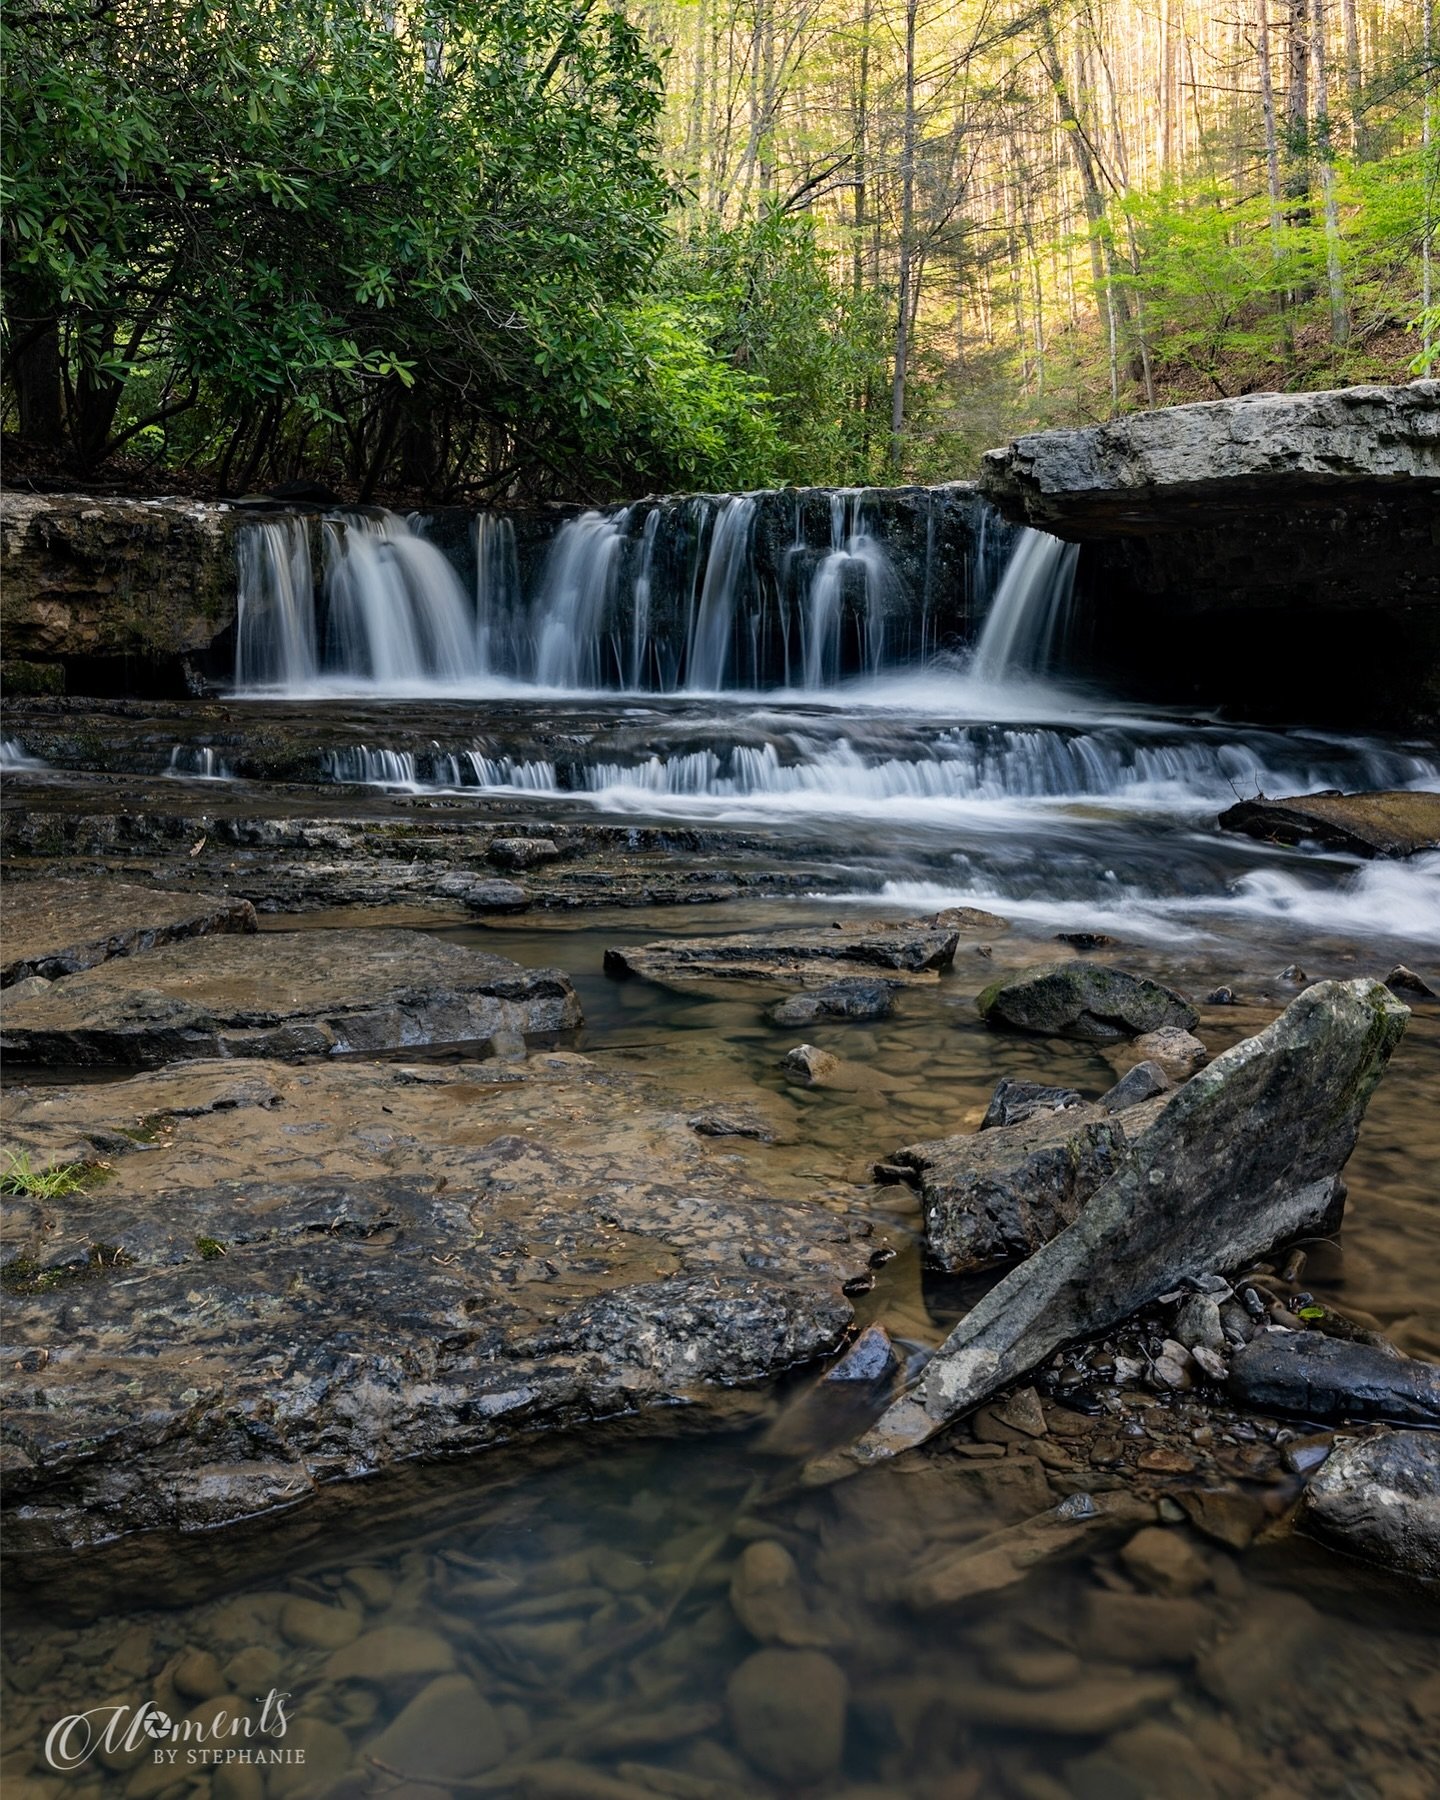 It&rsquo;s another wonderful #waterfallwednesday 🤩
Time to take a break from all the gorgeous #auroraborealis photos in your feed and enjoy some peaceful waterfall scenes!  Today&rsquo;s waterfall feature is #mashforkfallswv located in #campcreeksta